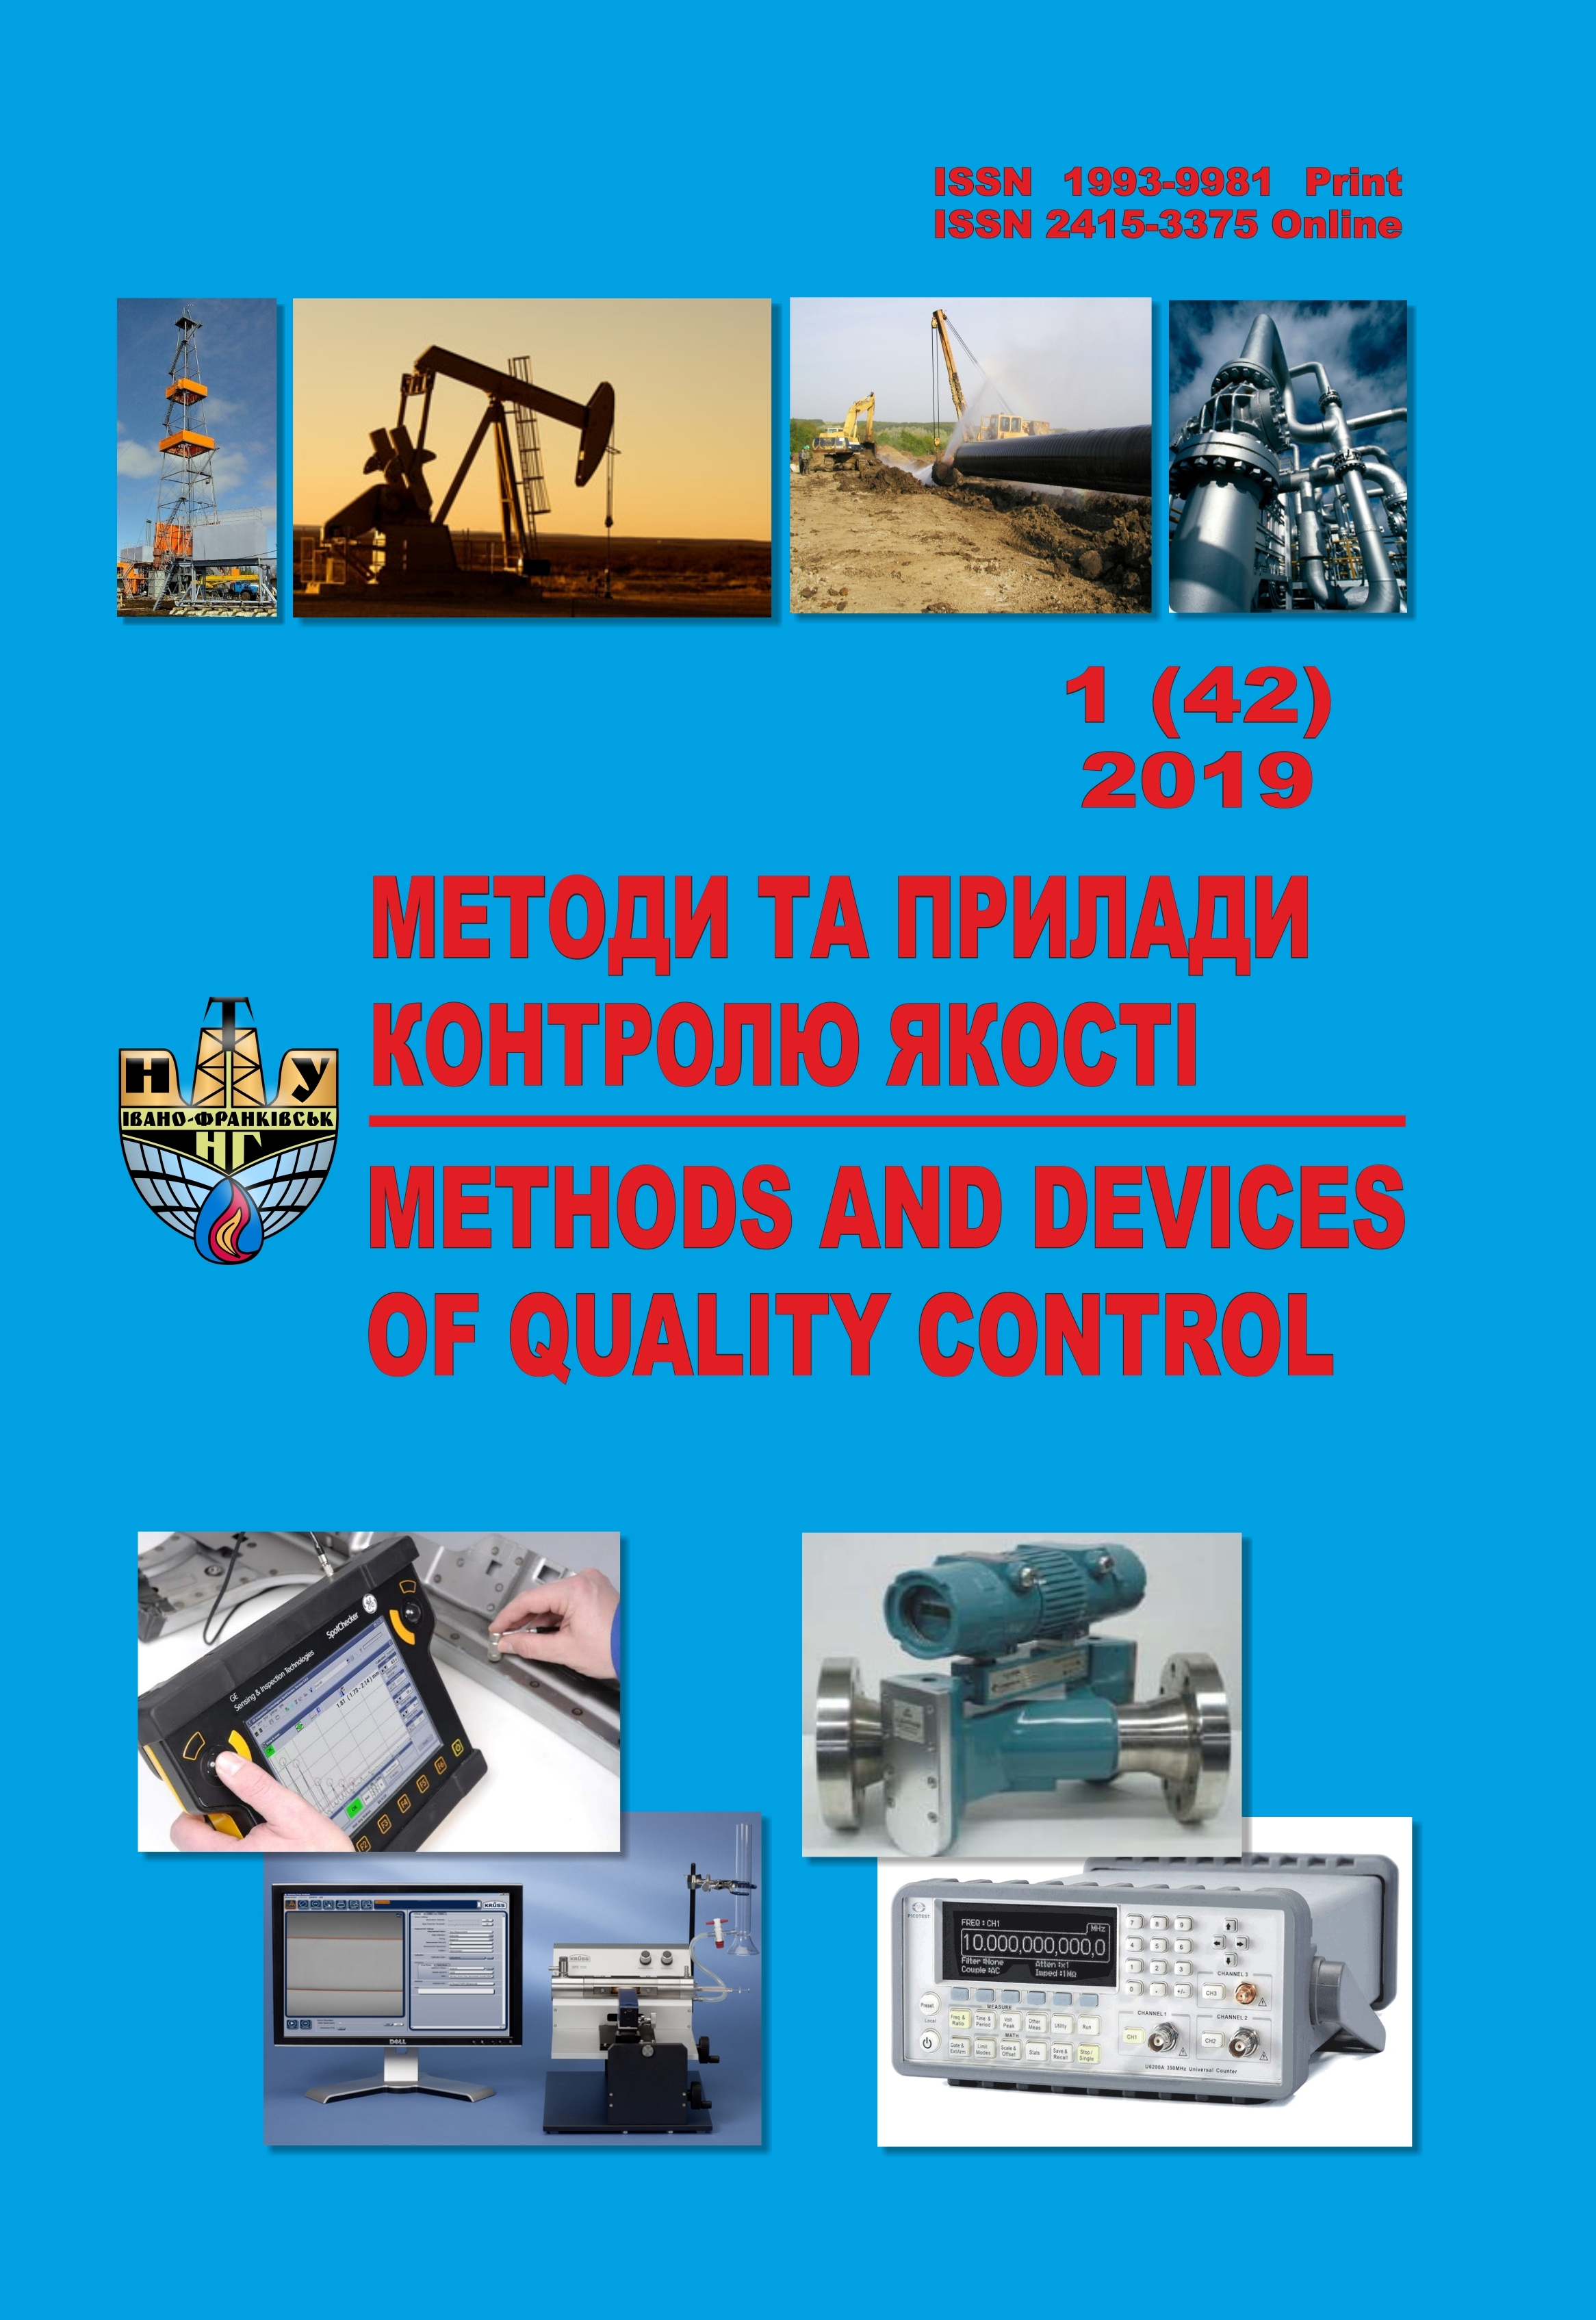 					View No. 1(42) (2019): METHODS AND DEVICES OF QUALITY CONTROL
				